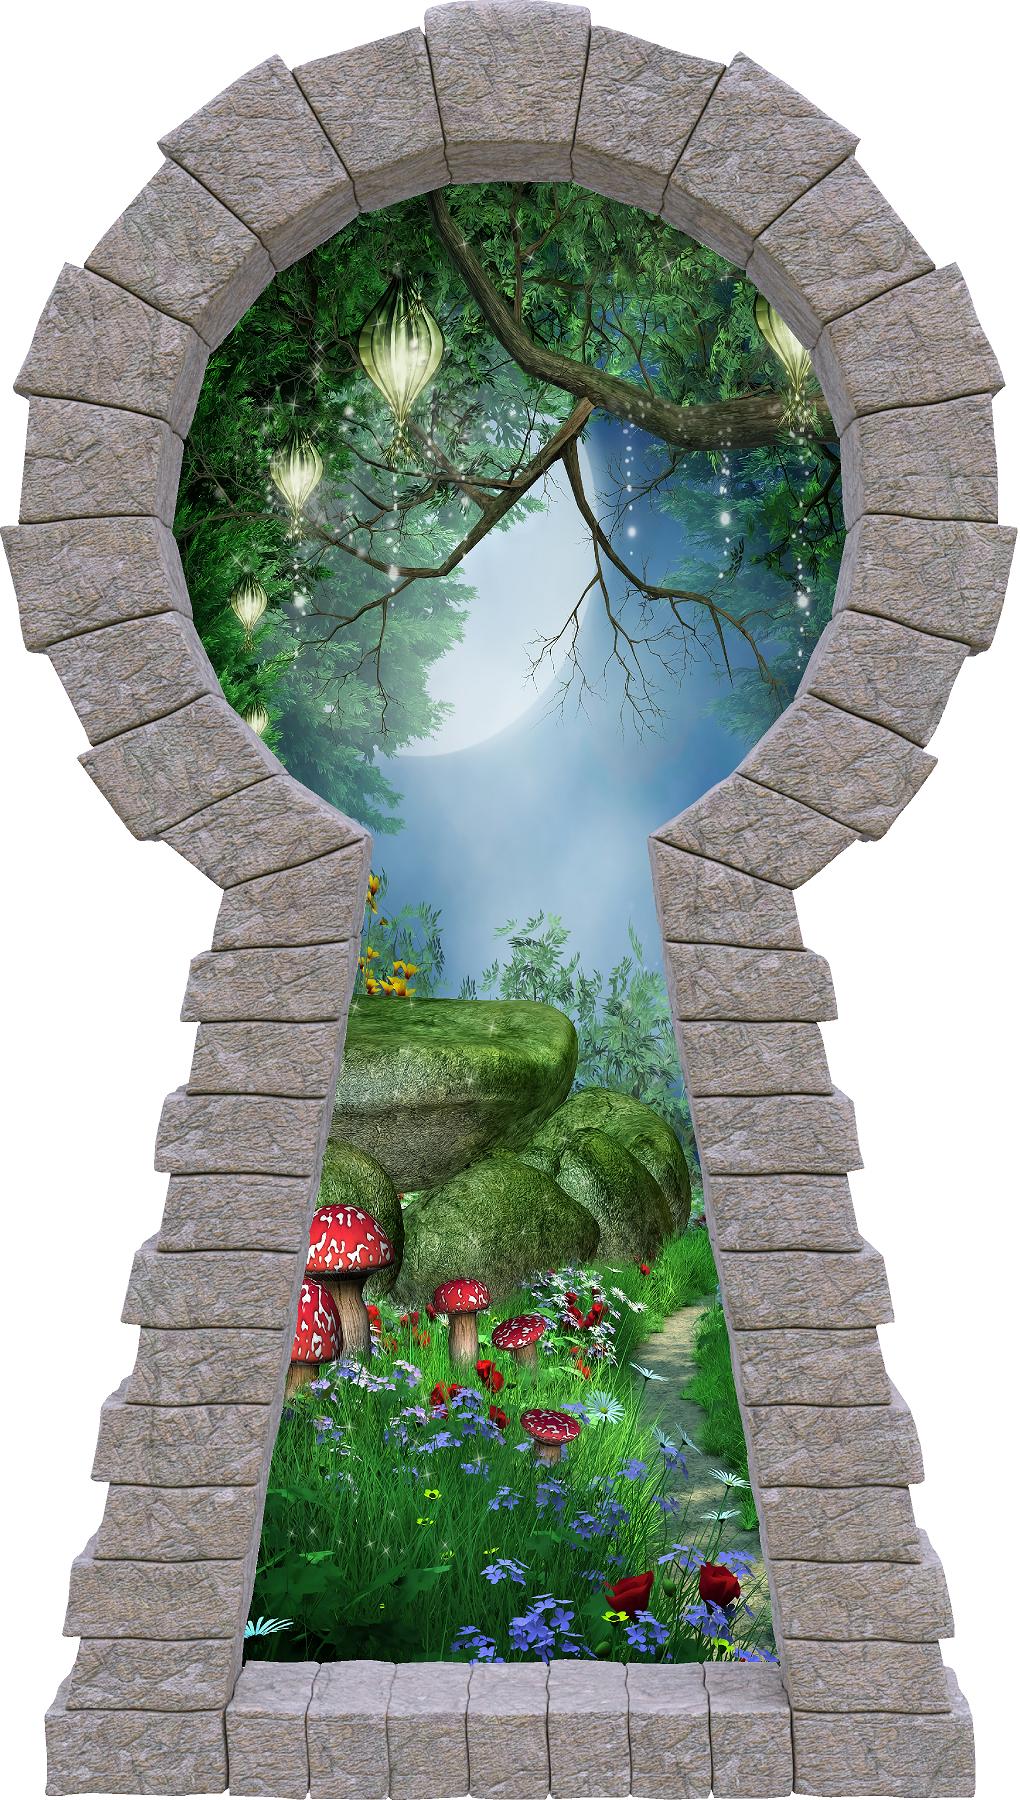 3D Stone Keyhole Wall Decal Enchanted Lantern Forest #1 Fantasy Brick Window Removable Fabric Vinyl Wall Sticker | DecalBaby